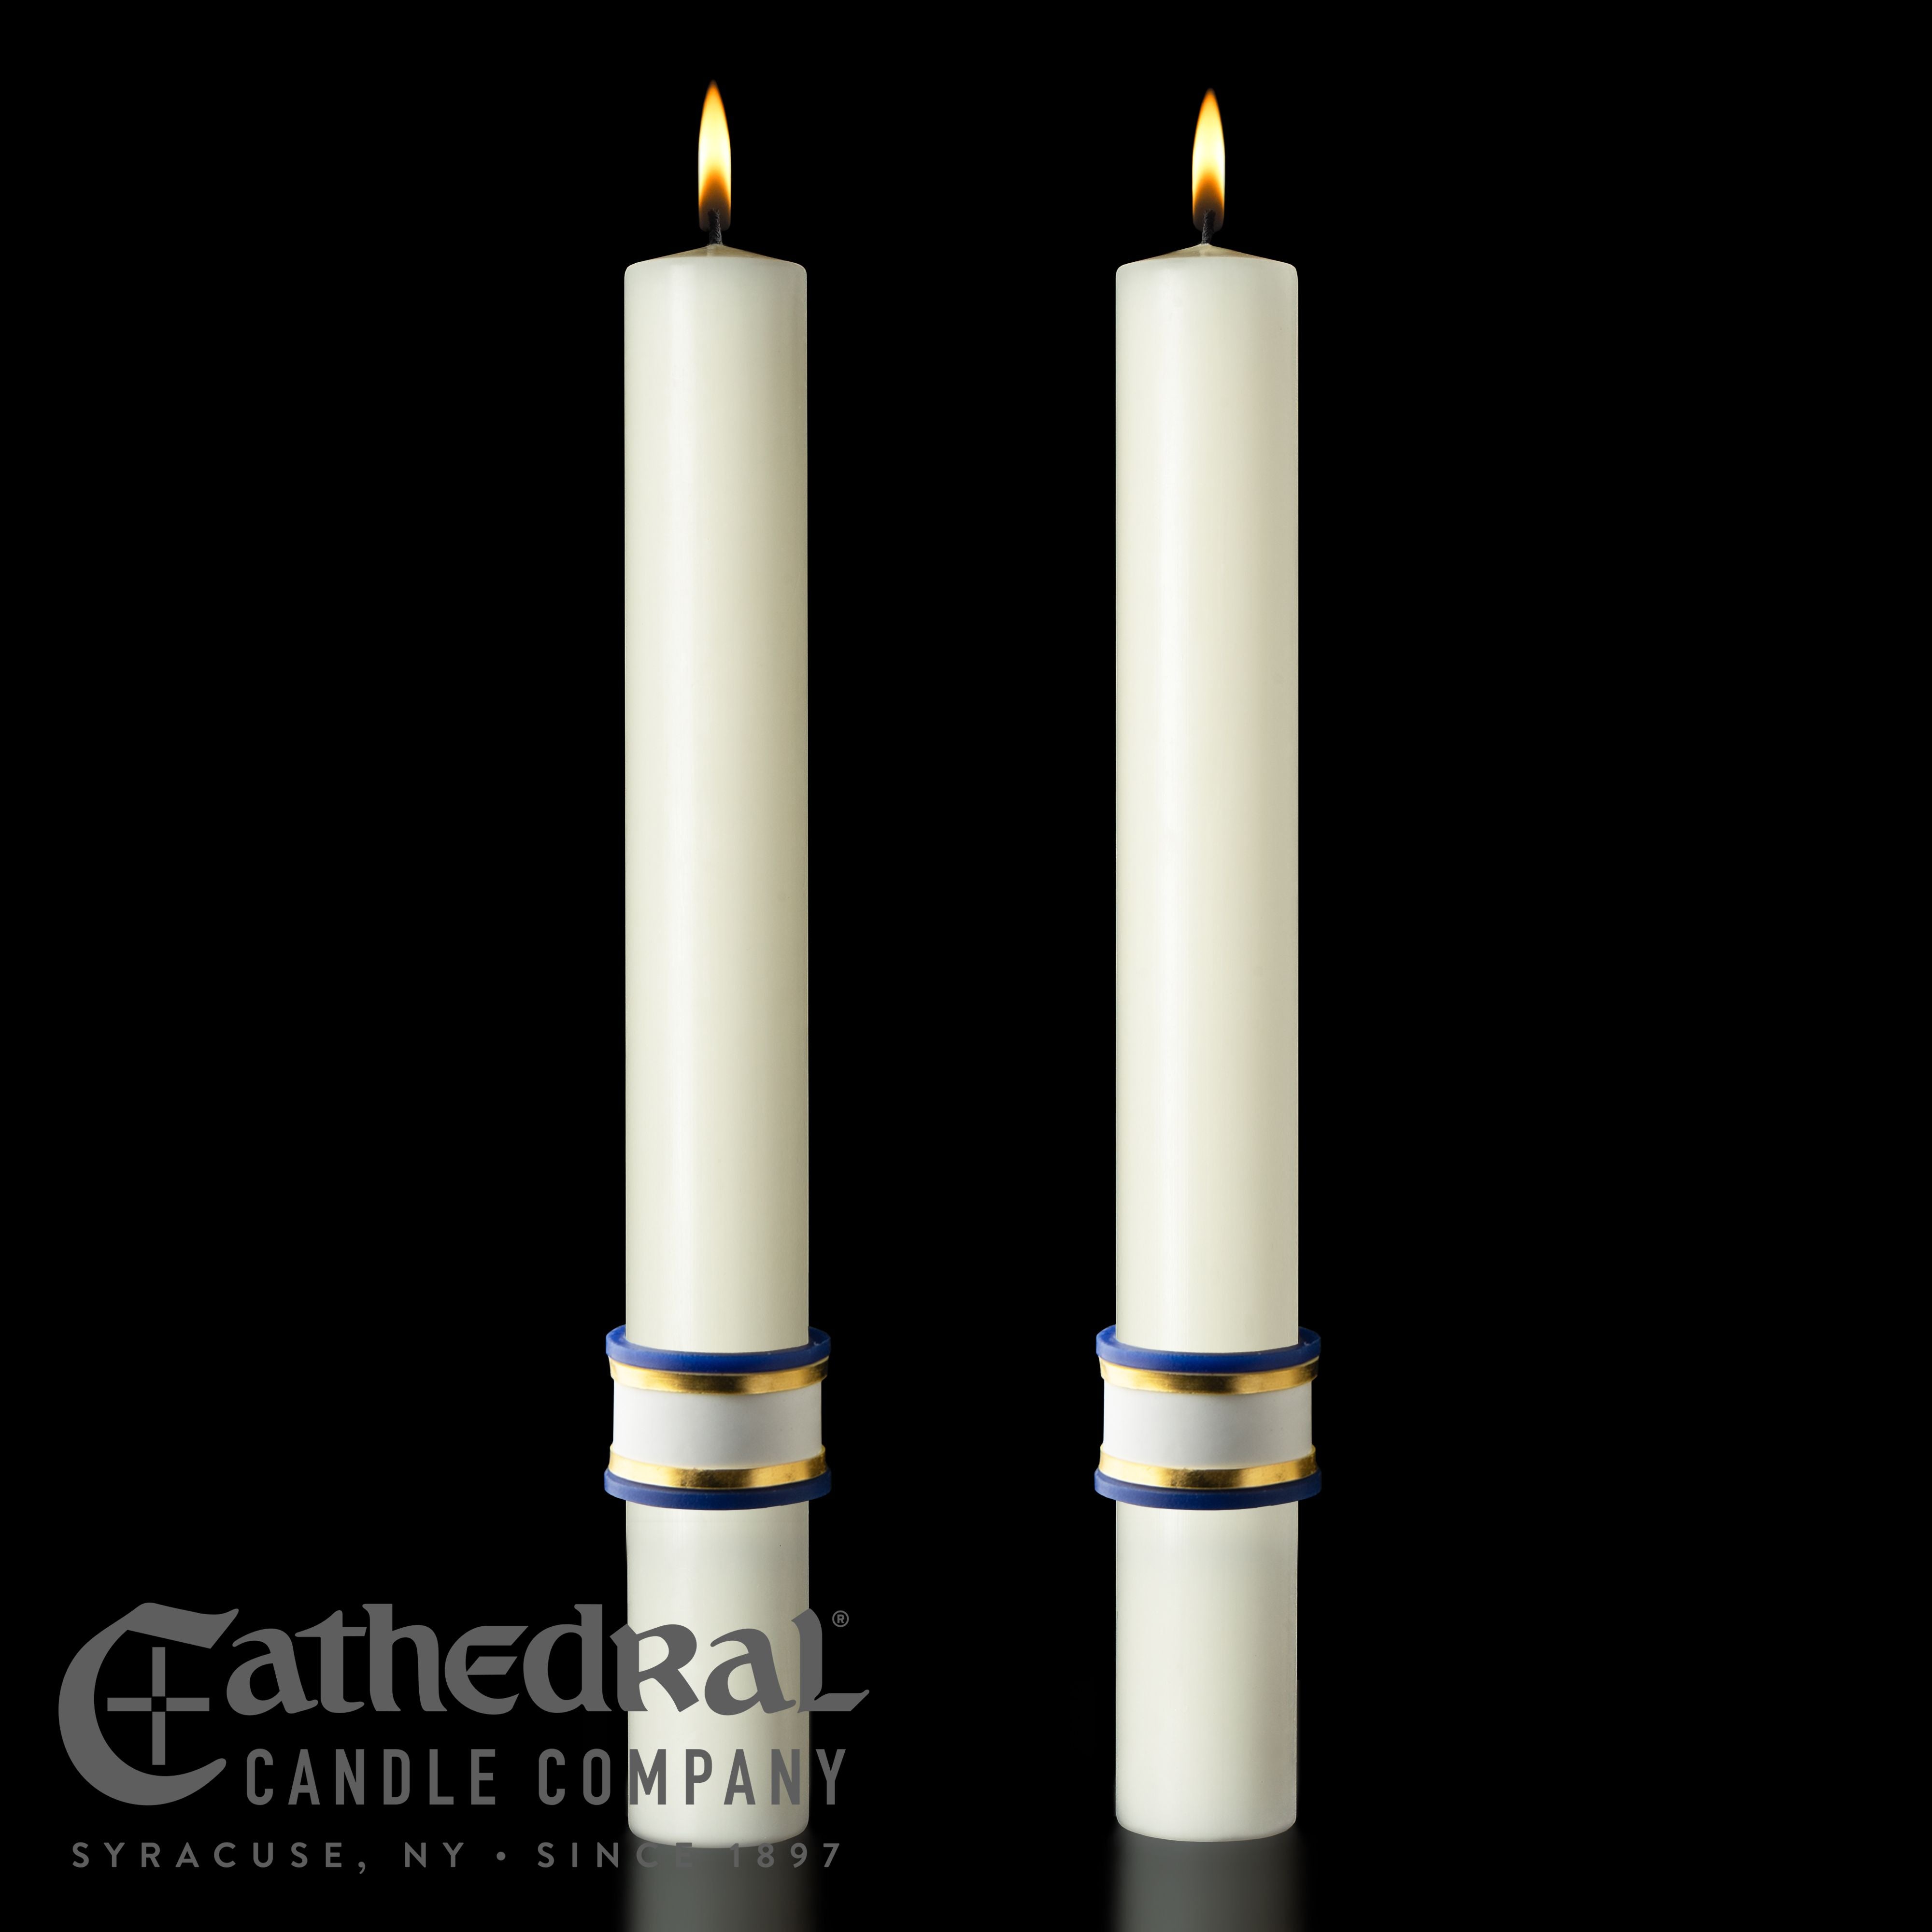 Complementing Altar Candles Eternal Glory